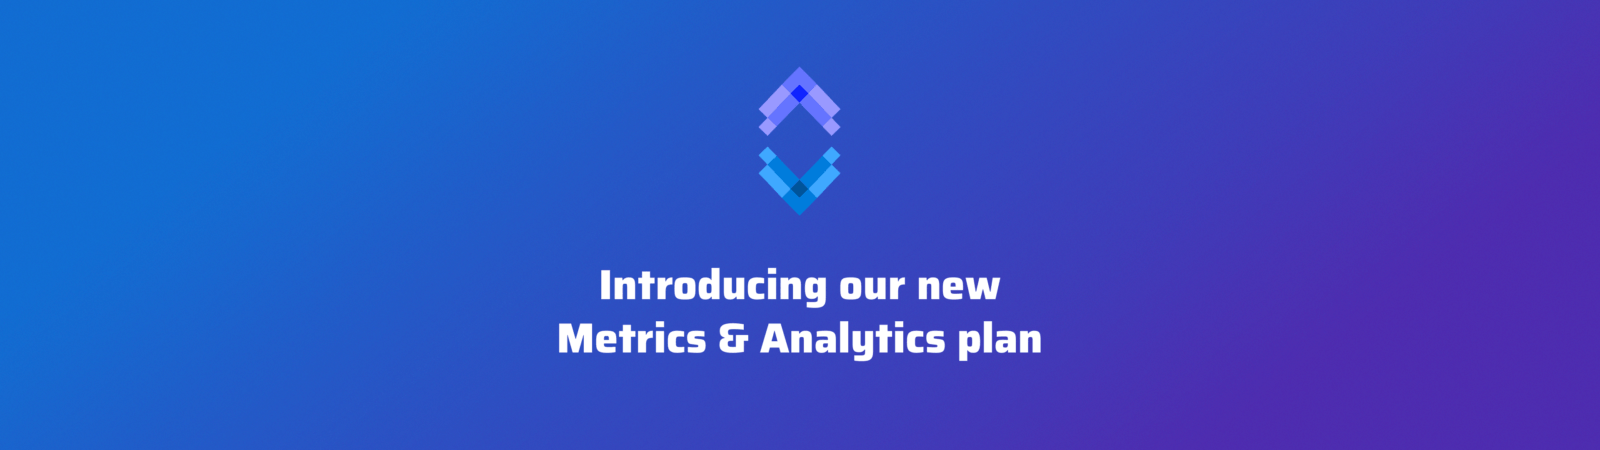 Introducting our new Metrics &#038; Analytics plan banner